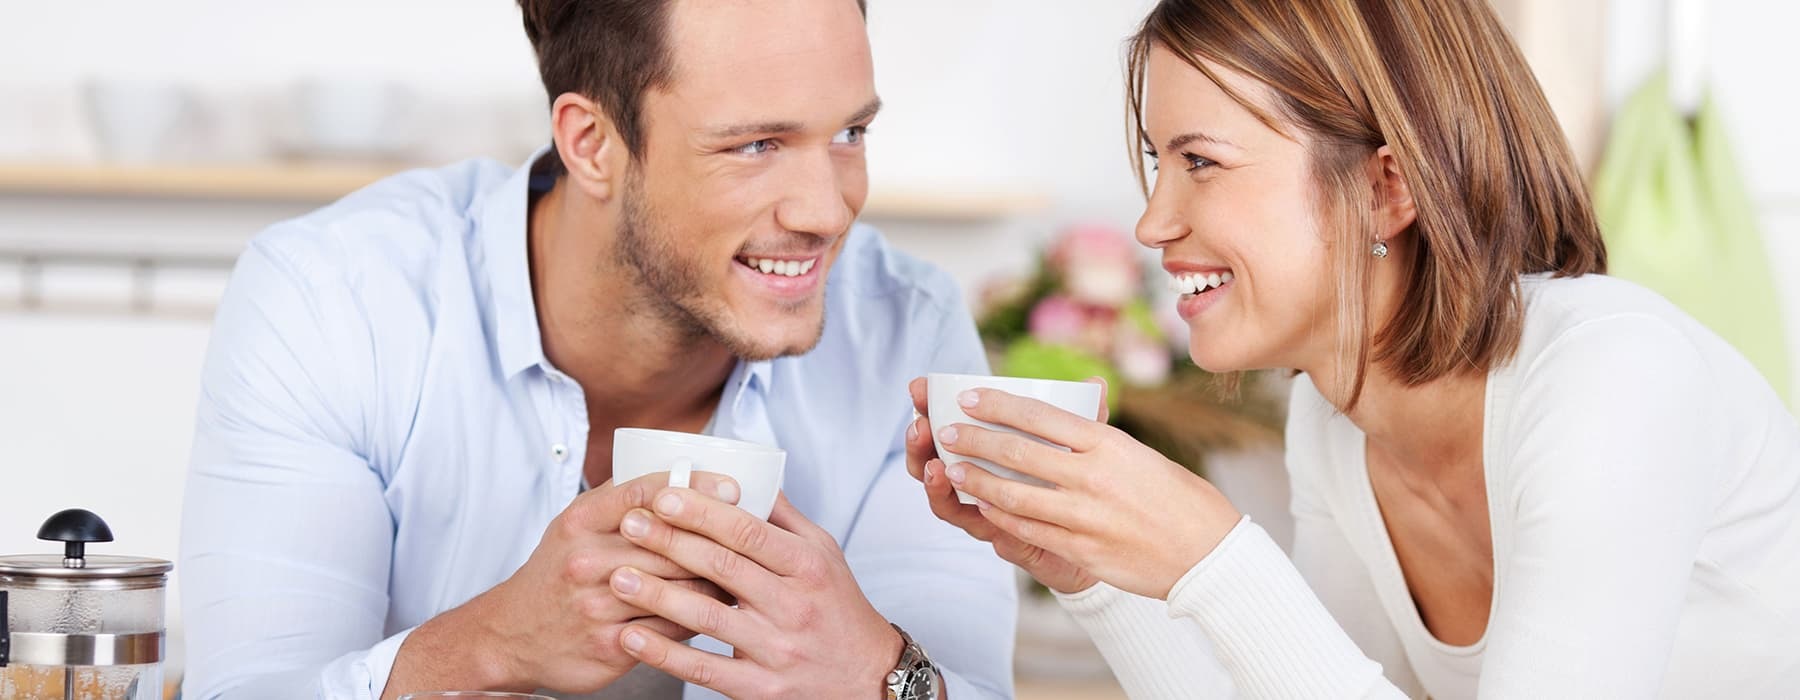 lifestyle image of a couple laughing and talking inside a kitchen